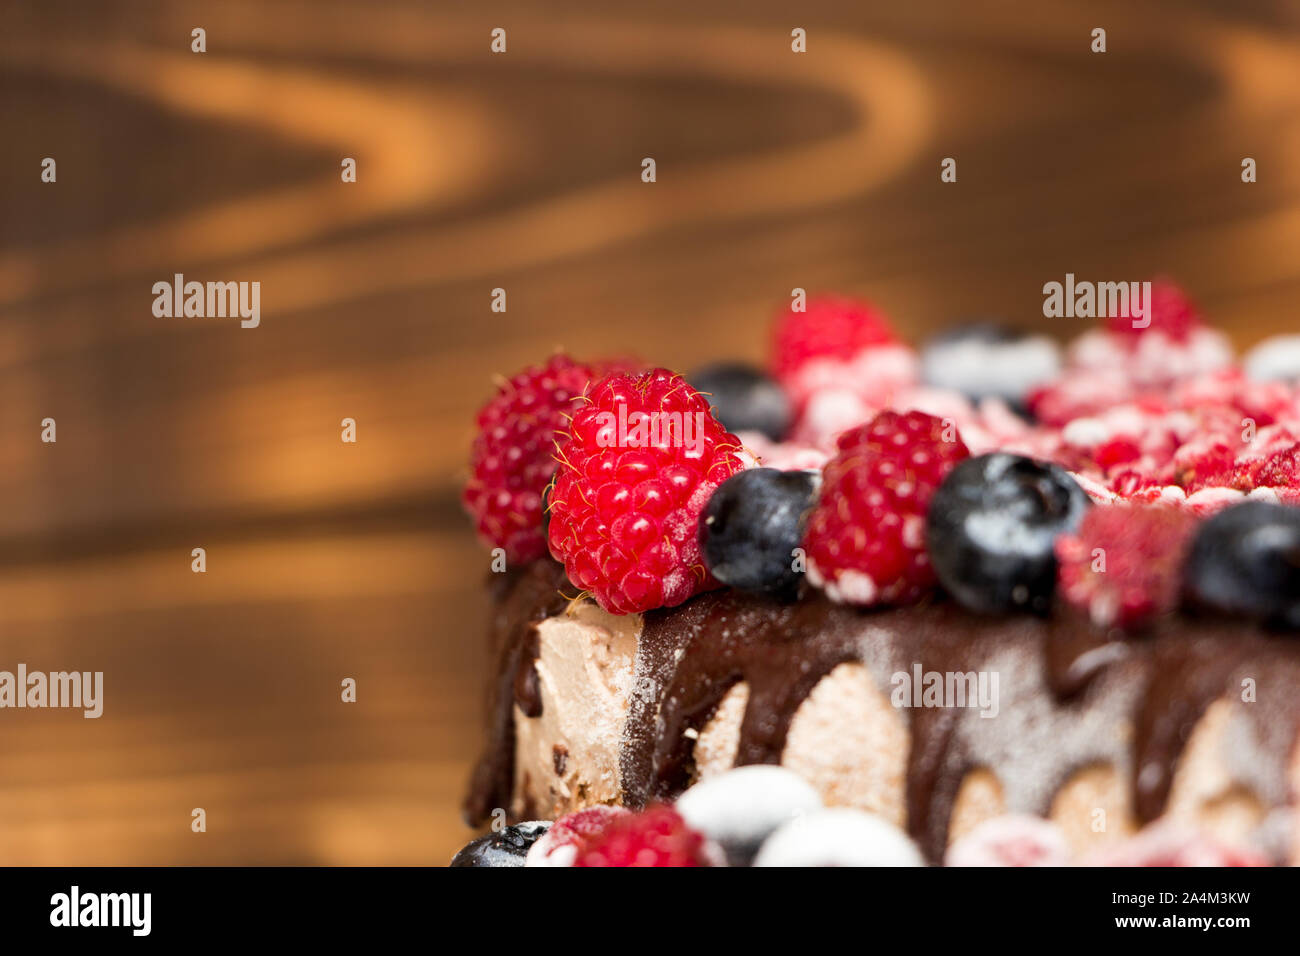 A close-up view of vegan chocolate cake covered with raspberries and blueberries, frozen in the refrigerator, on a table with blurred background. Copy Stock Photo